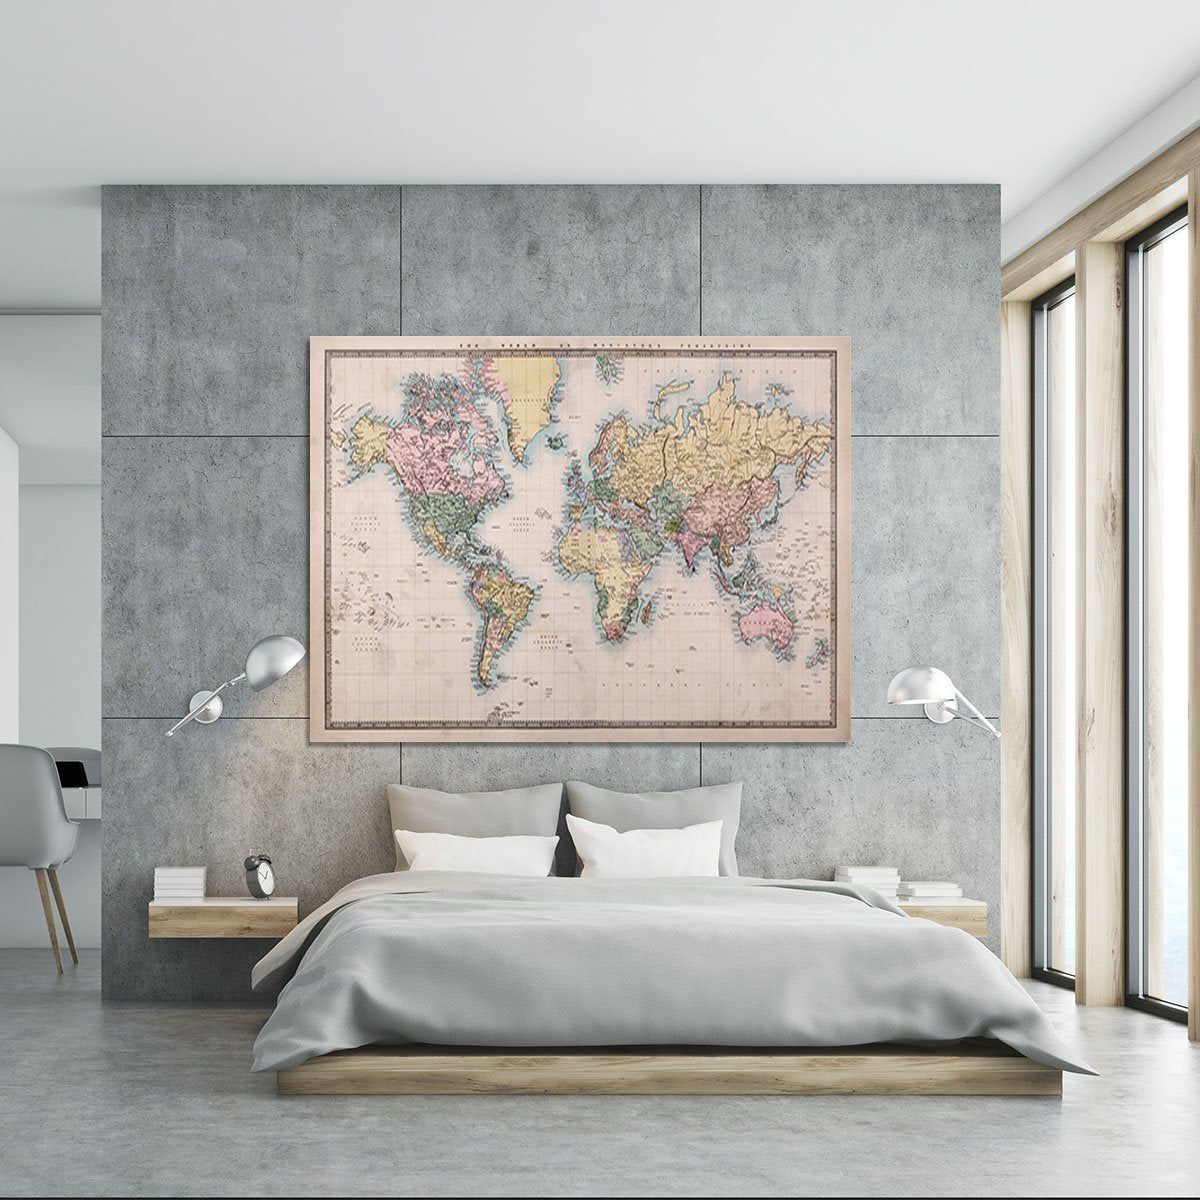 Original old hand coloured map Canvas Print or Poster